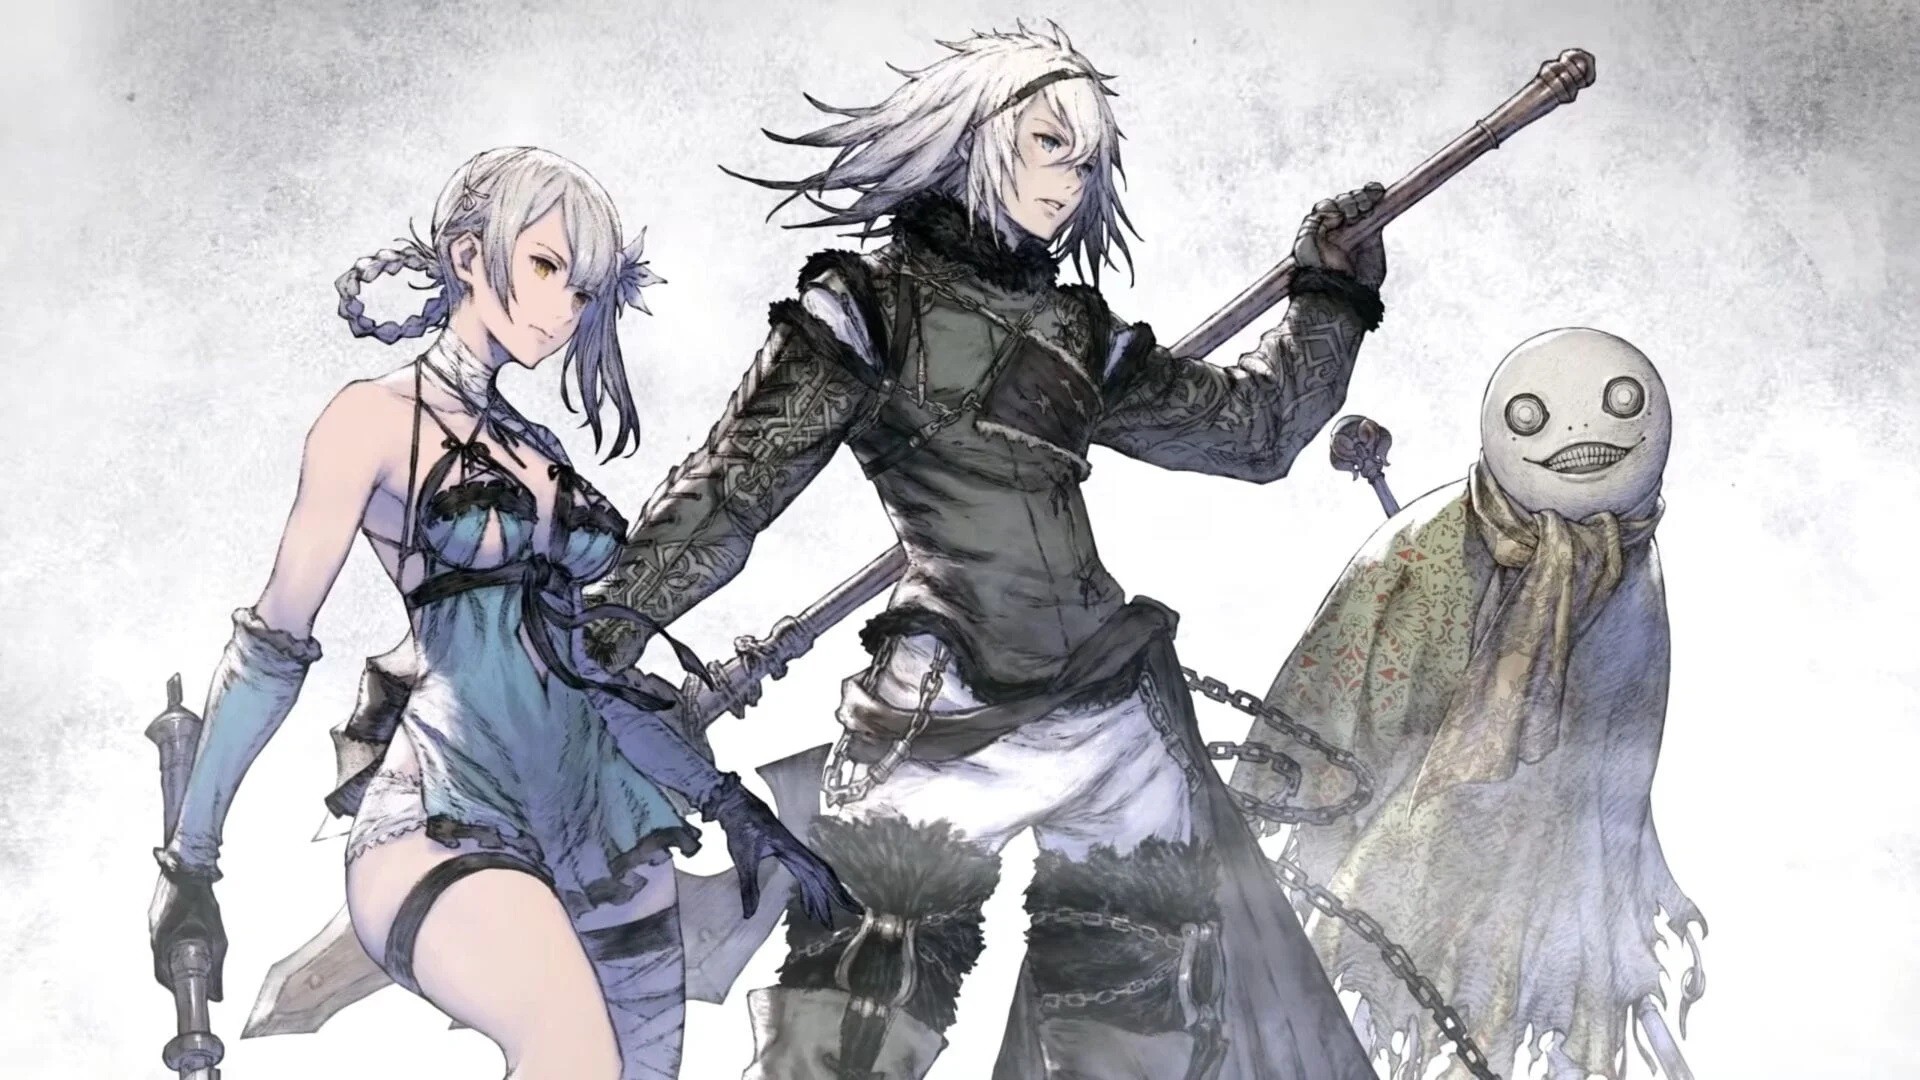 You are currently viewing NieR Replicant ver.1.22474487139… │ ★ 6